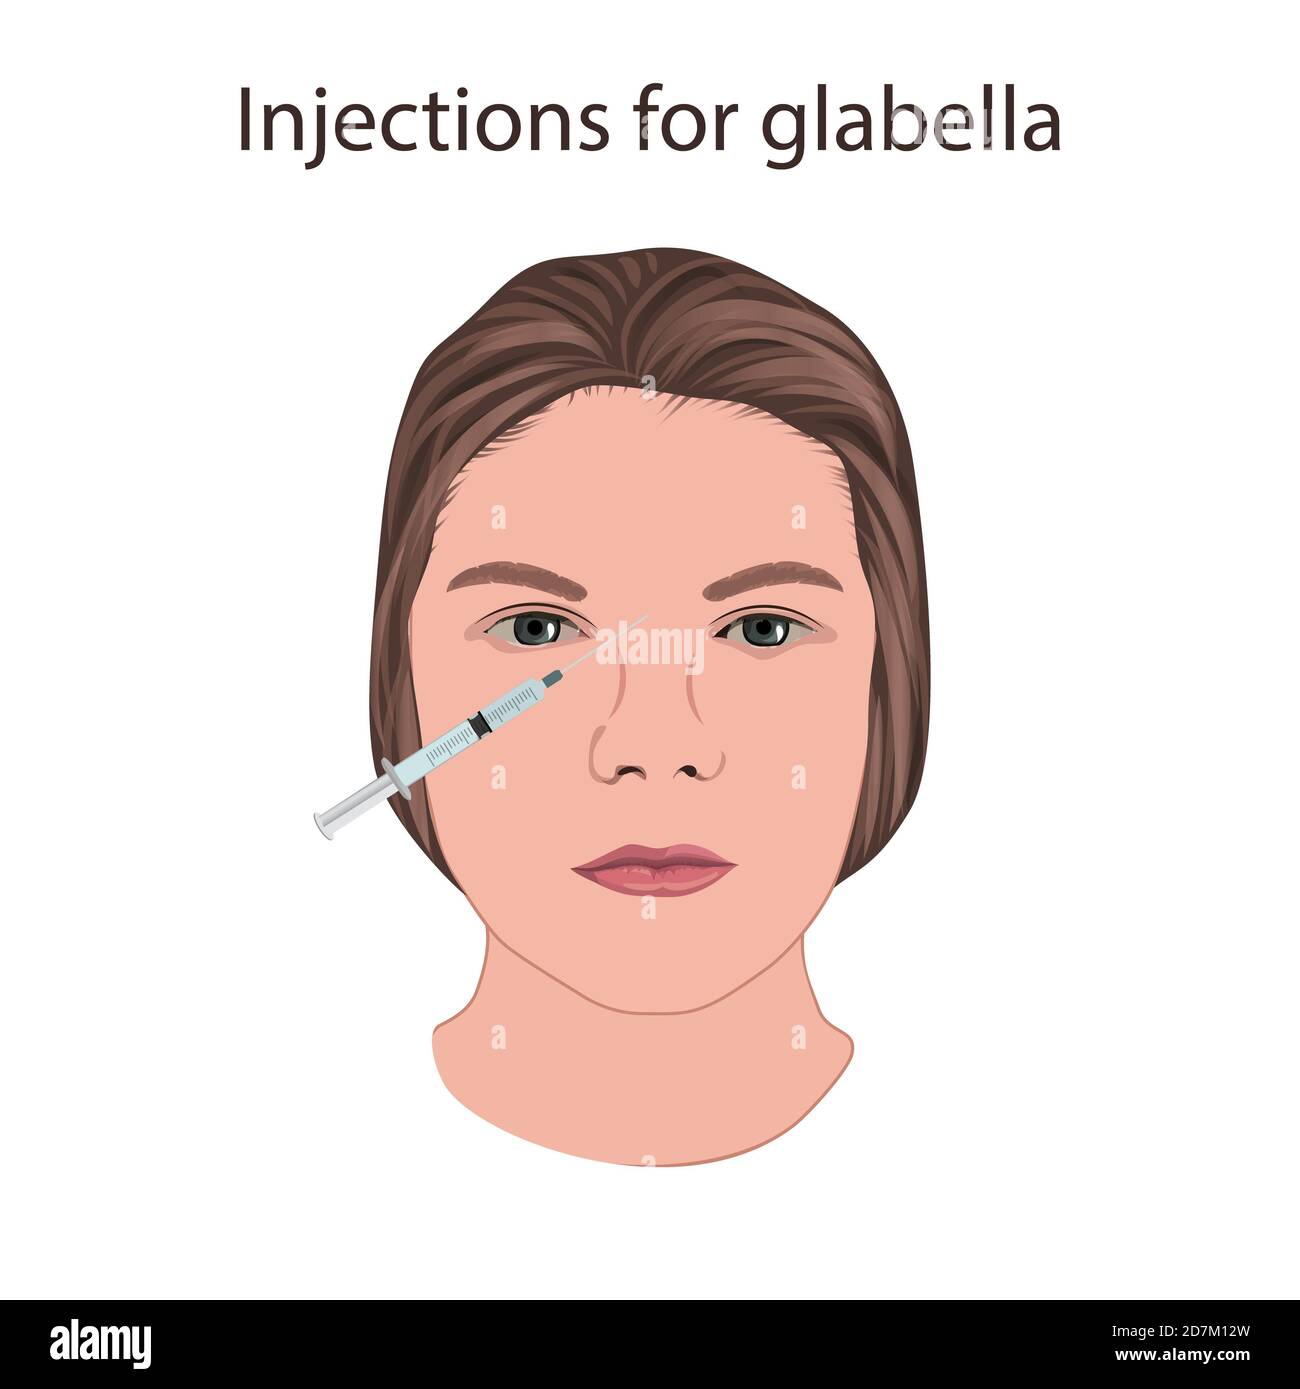 Injections for glabella, illustration. Stock Photo